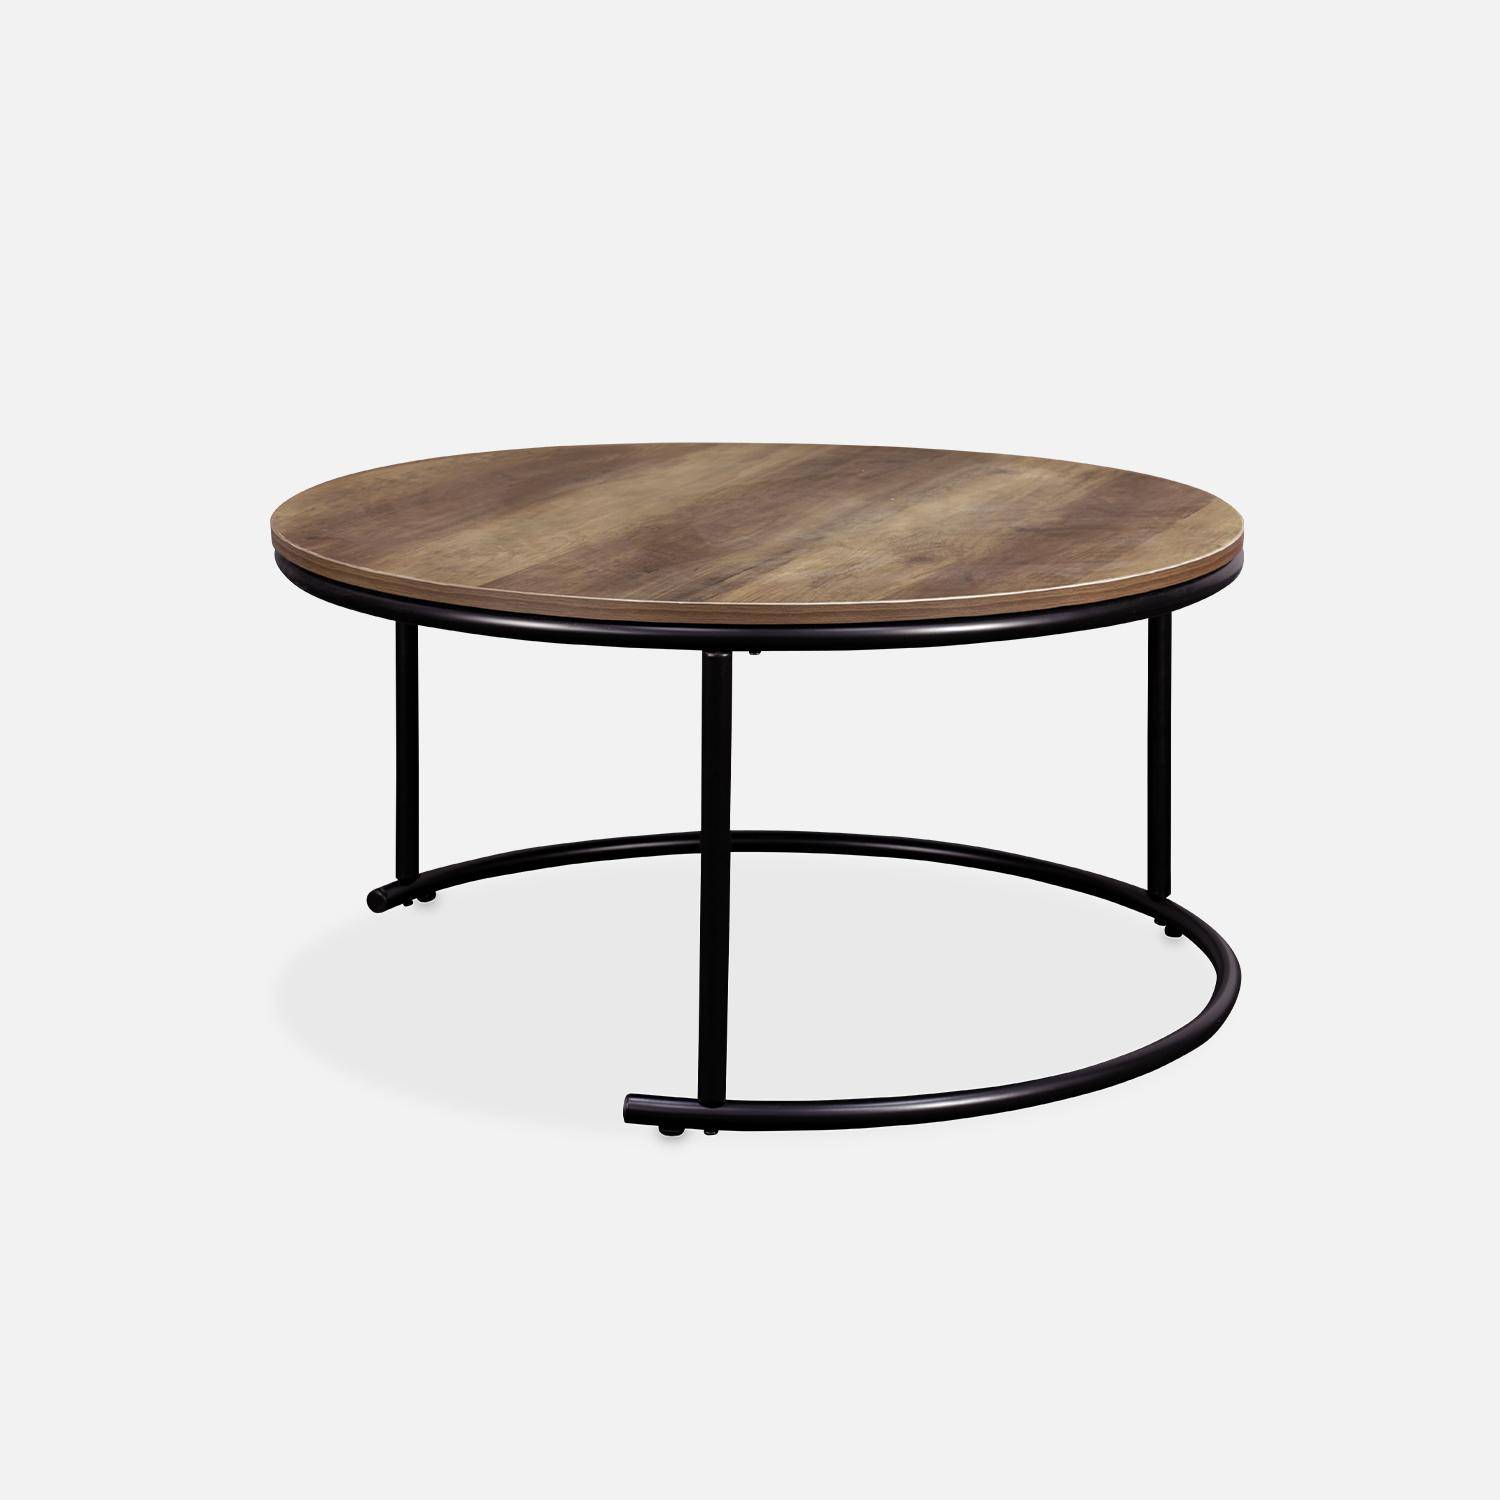 Pair of round, metal and wood-effect nesting coffee tables, 77x40x57cm - Loft,sweeek,Photo5